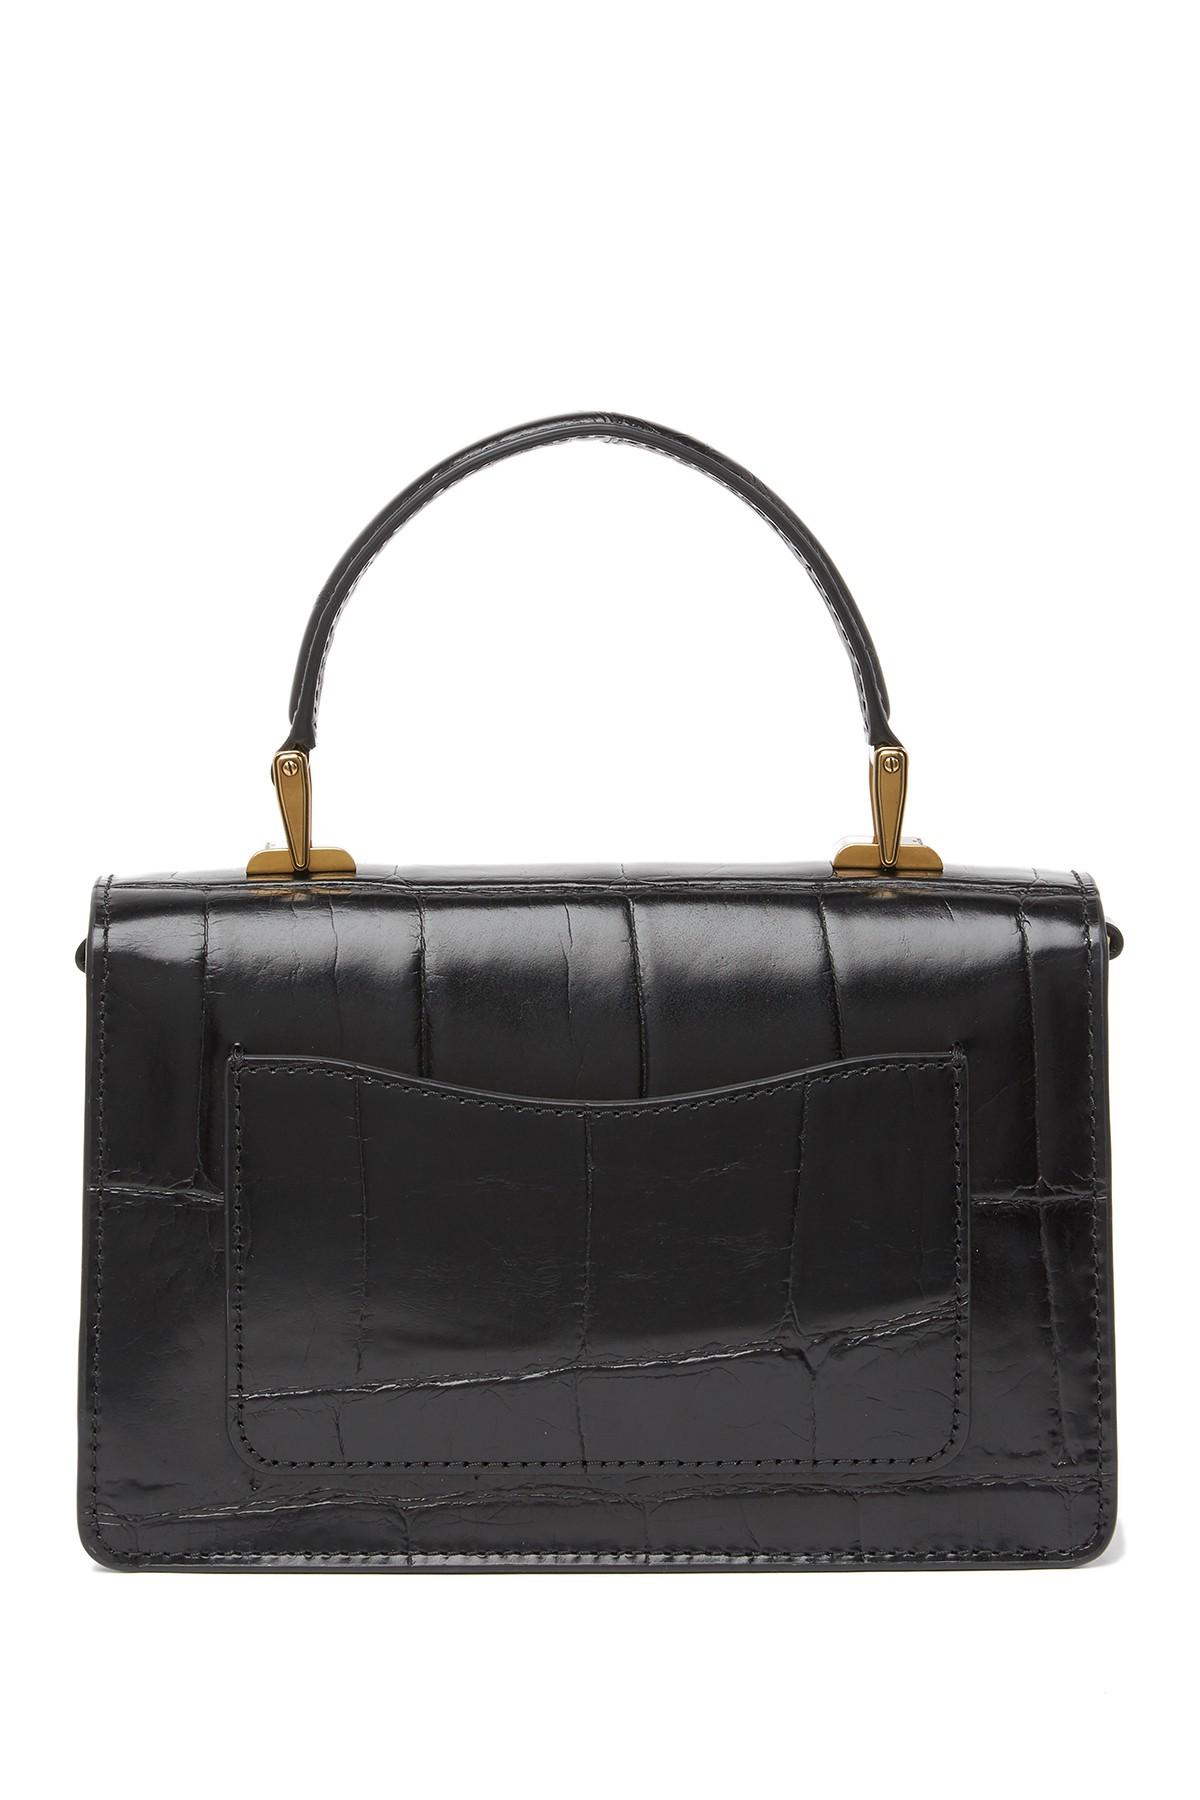 Marc Jacobs The Downtown Croc Embossed Leather Shoulder Bag in Black - Lyst